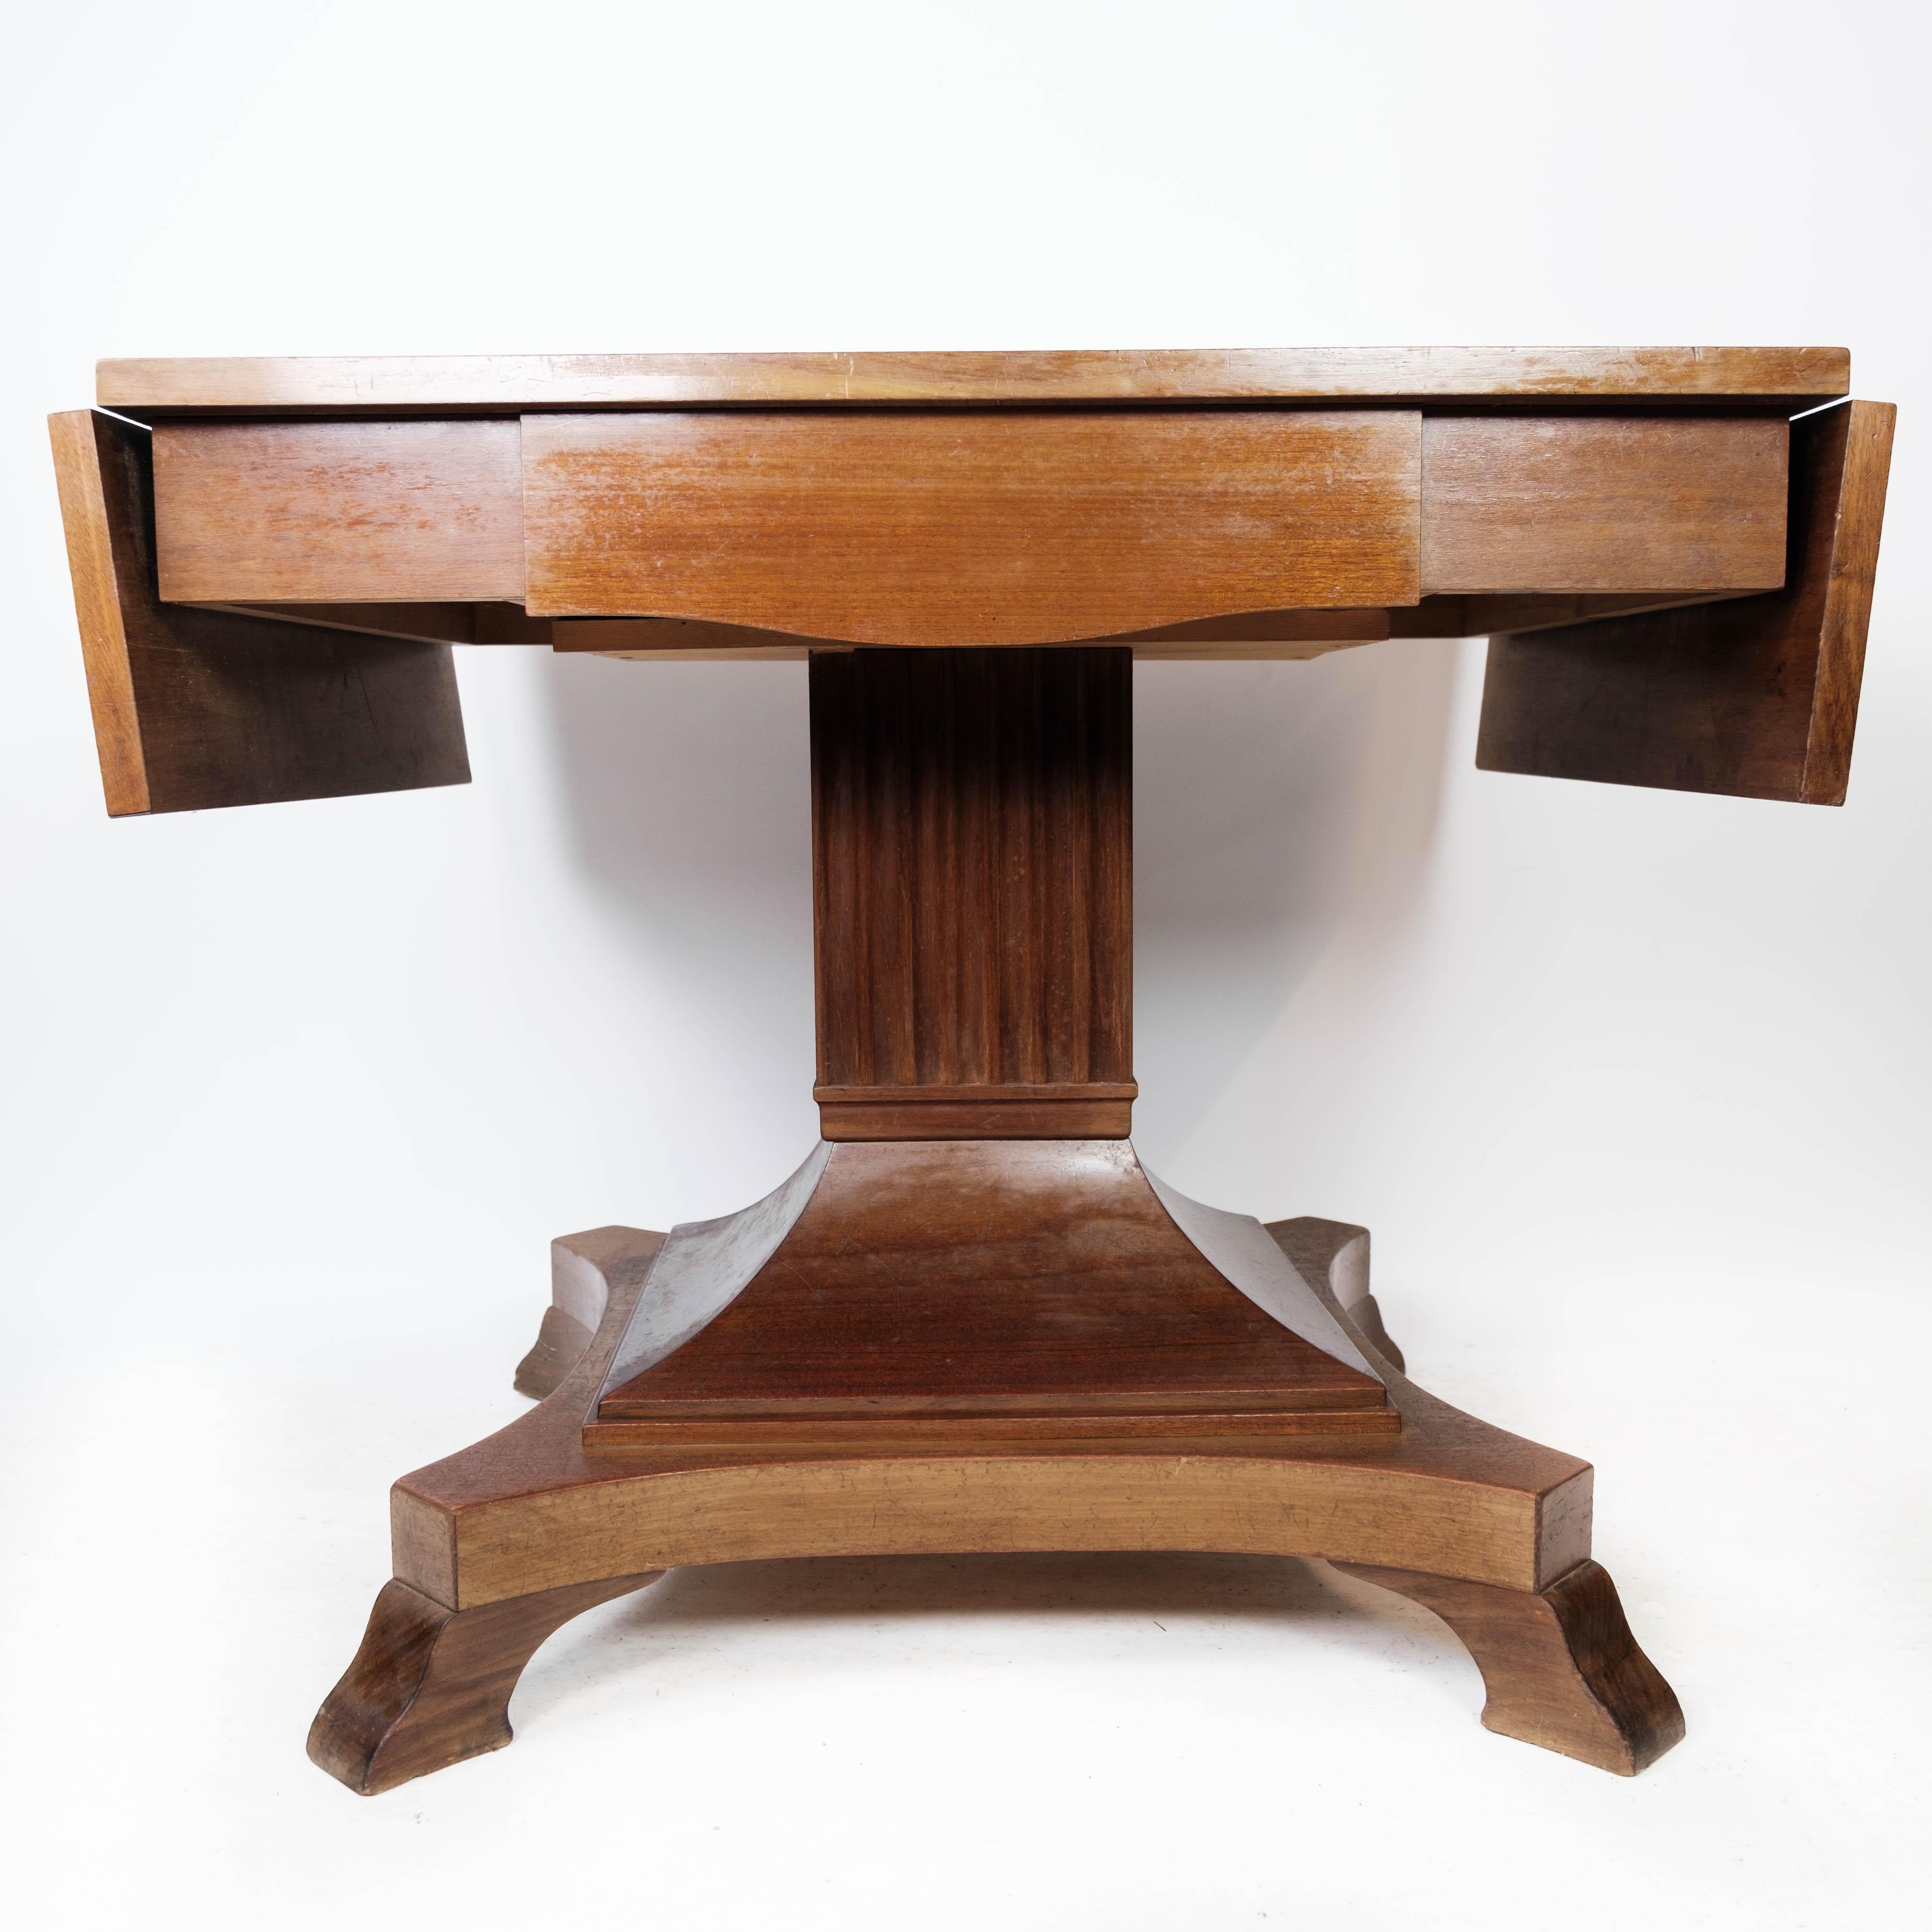 
The mahogany dining table from the 1920s is a timeless piece of furniture that exudes elegance and sophistication. Crafted from high-quality mahogany wood, this table boasts a rich and luxurious appearance that adds a touch of classic charm to any